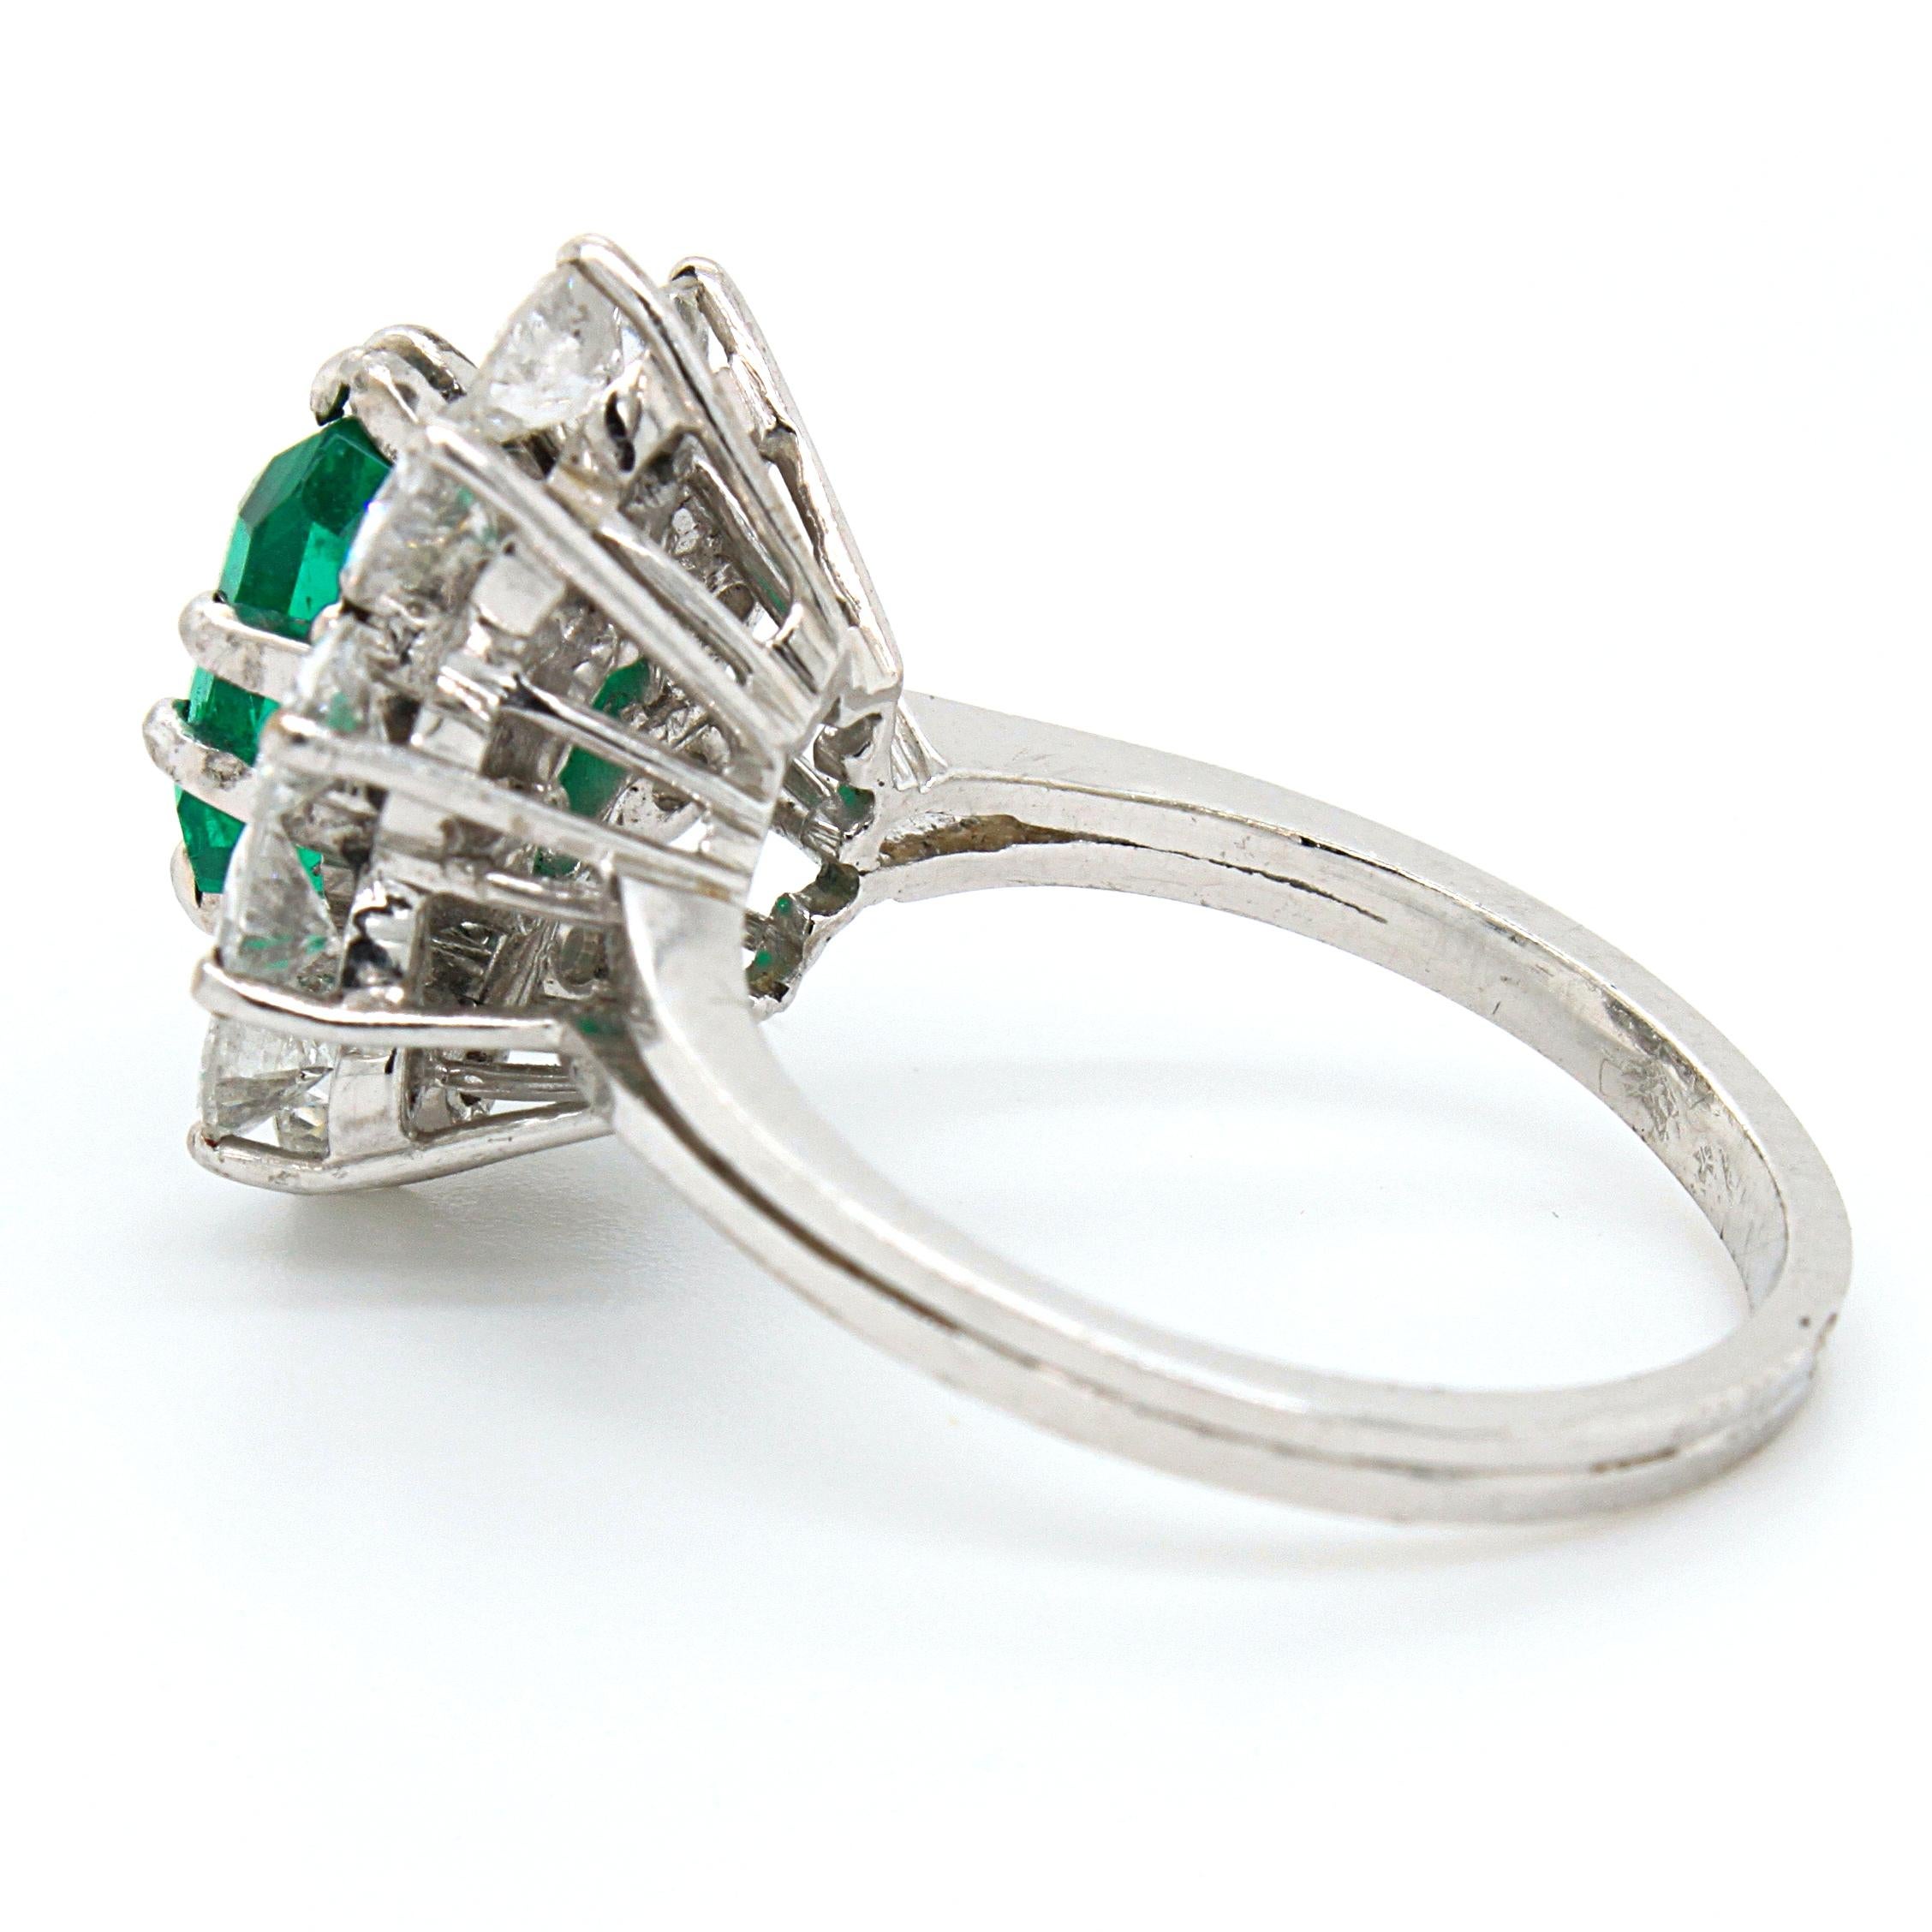 Columbian Emerald 'Minor-Oil', 1.88ct, and Diamond Ring, France In Excellent Condition For Sale In Idar-Oberstein, DE